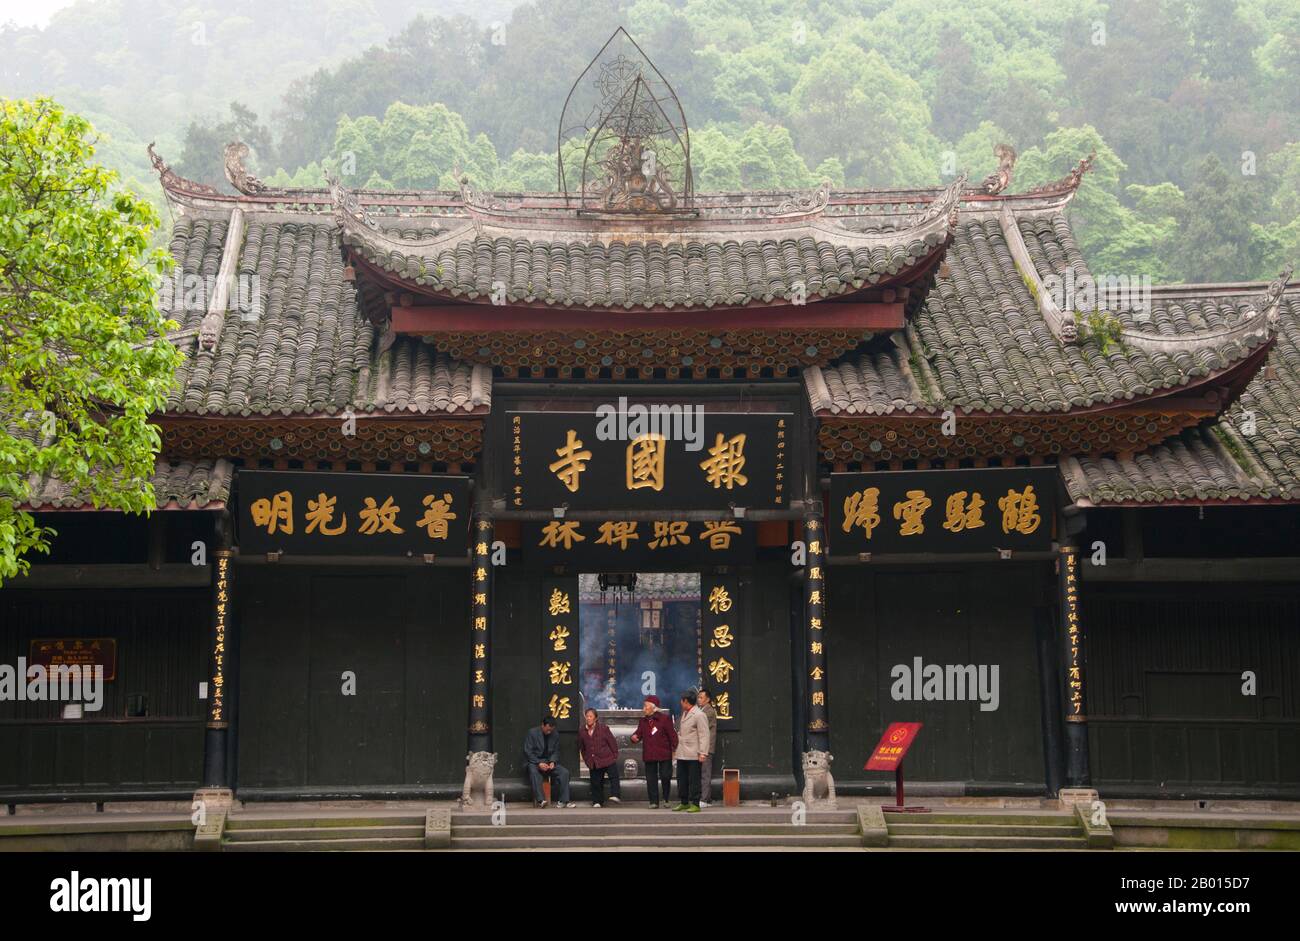 China: Entrance to Baoguo Si (Declare Nation Temple), at the foot of Emeishan (Mount Emei), Sichuan Province.  Baoguo Si (Declare Nation Temple), at the foot of Mount Emei, was first constructed in the 16th century during the Ming Dynasty (1368-1644).  At 3,099 metres (10,167 ft), Mt. Emei is the highest of the Four Sacred Buddhist Mountains of China. The patron bodhisattva of Emei is Samantabhadra, known in Chinese as Puxian. 16th and 17th century sources allude to the practice of martial arts in the monasteries of Mount Emei. Stock Photo